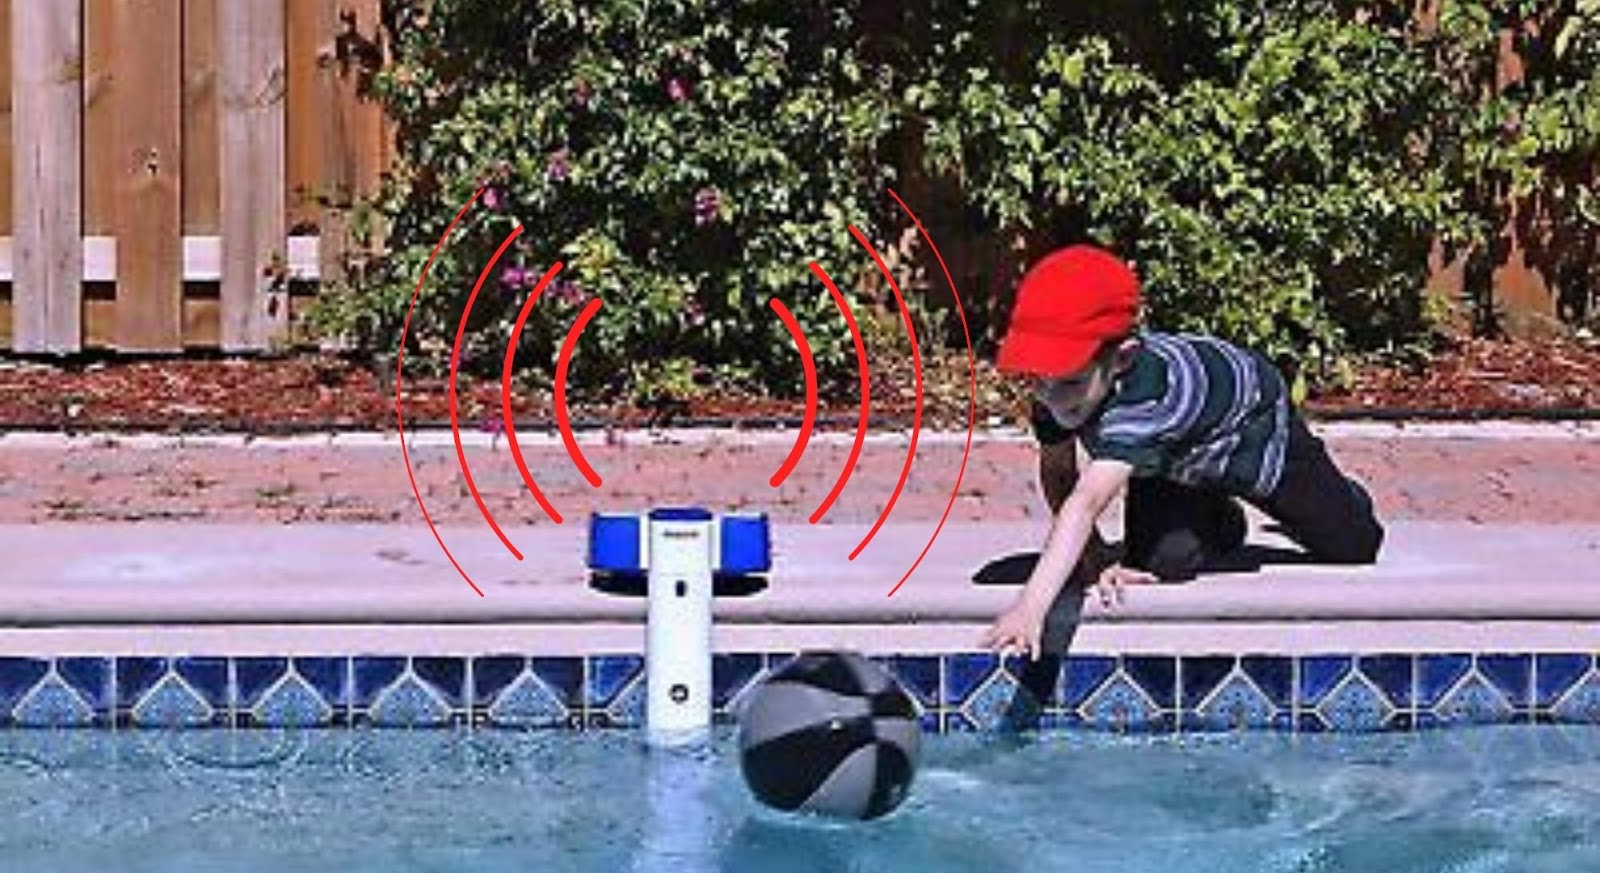 Pool Safety with Pool Alarms